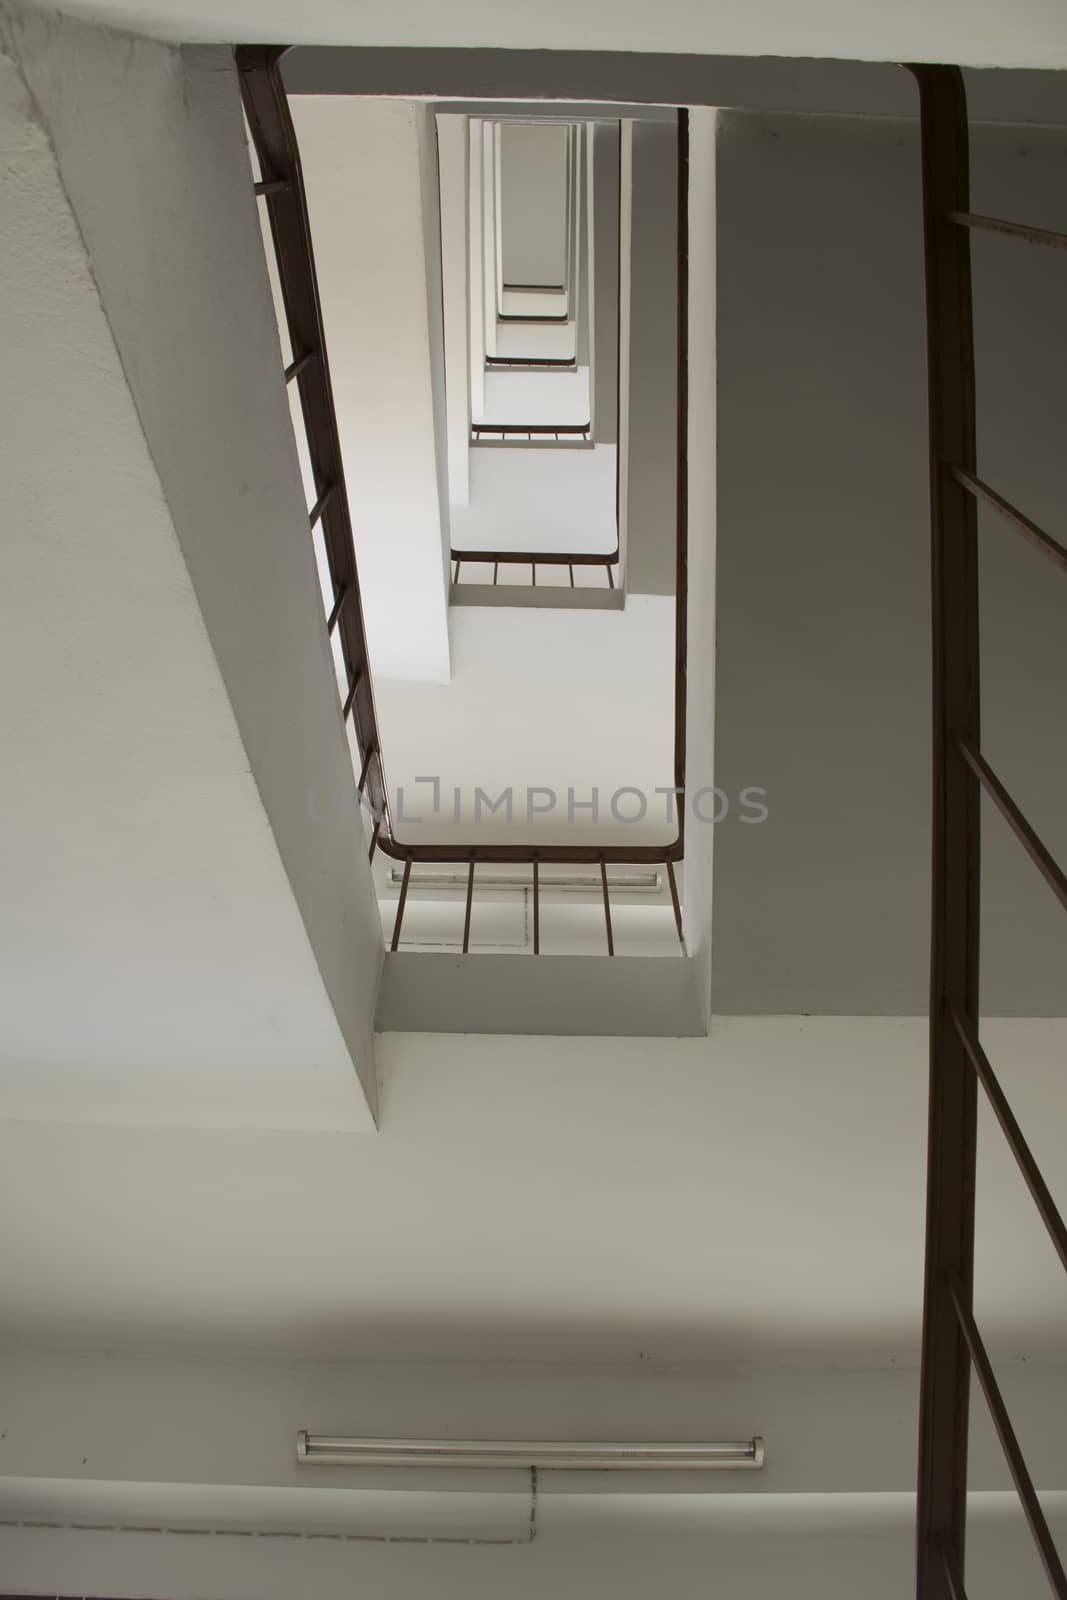 looking up stairwell building. Abstract architecture background.